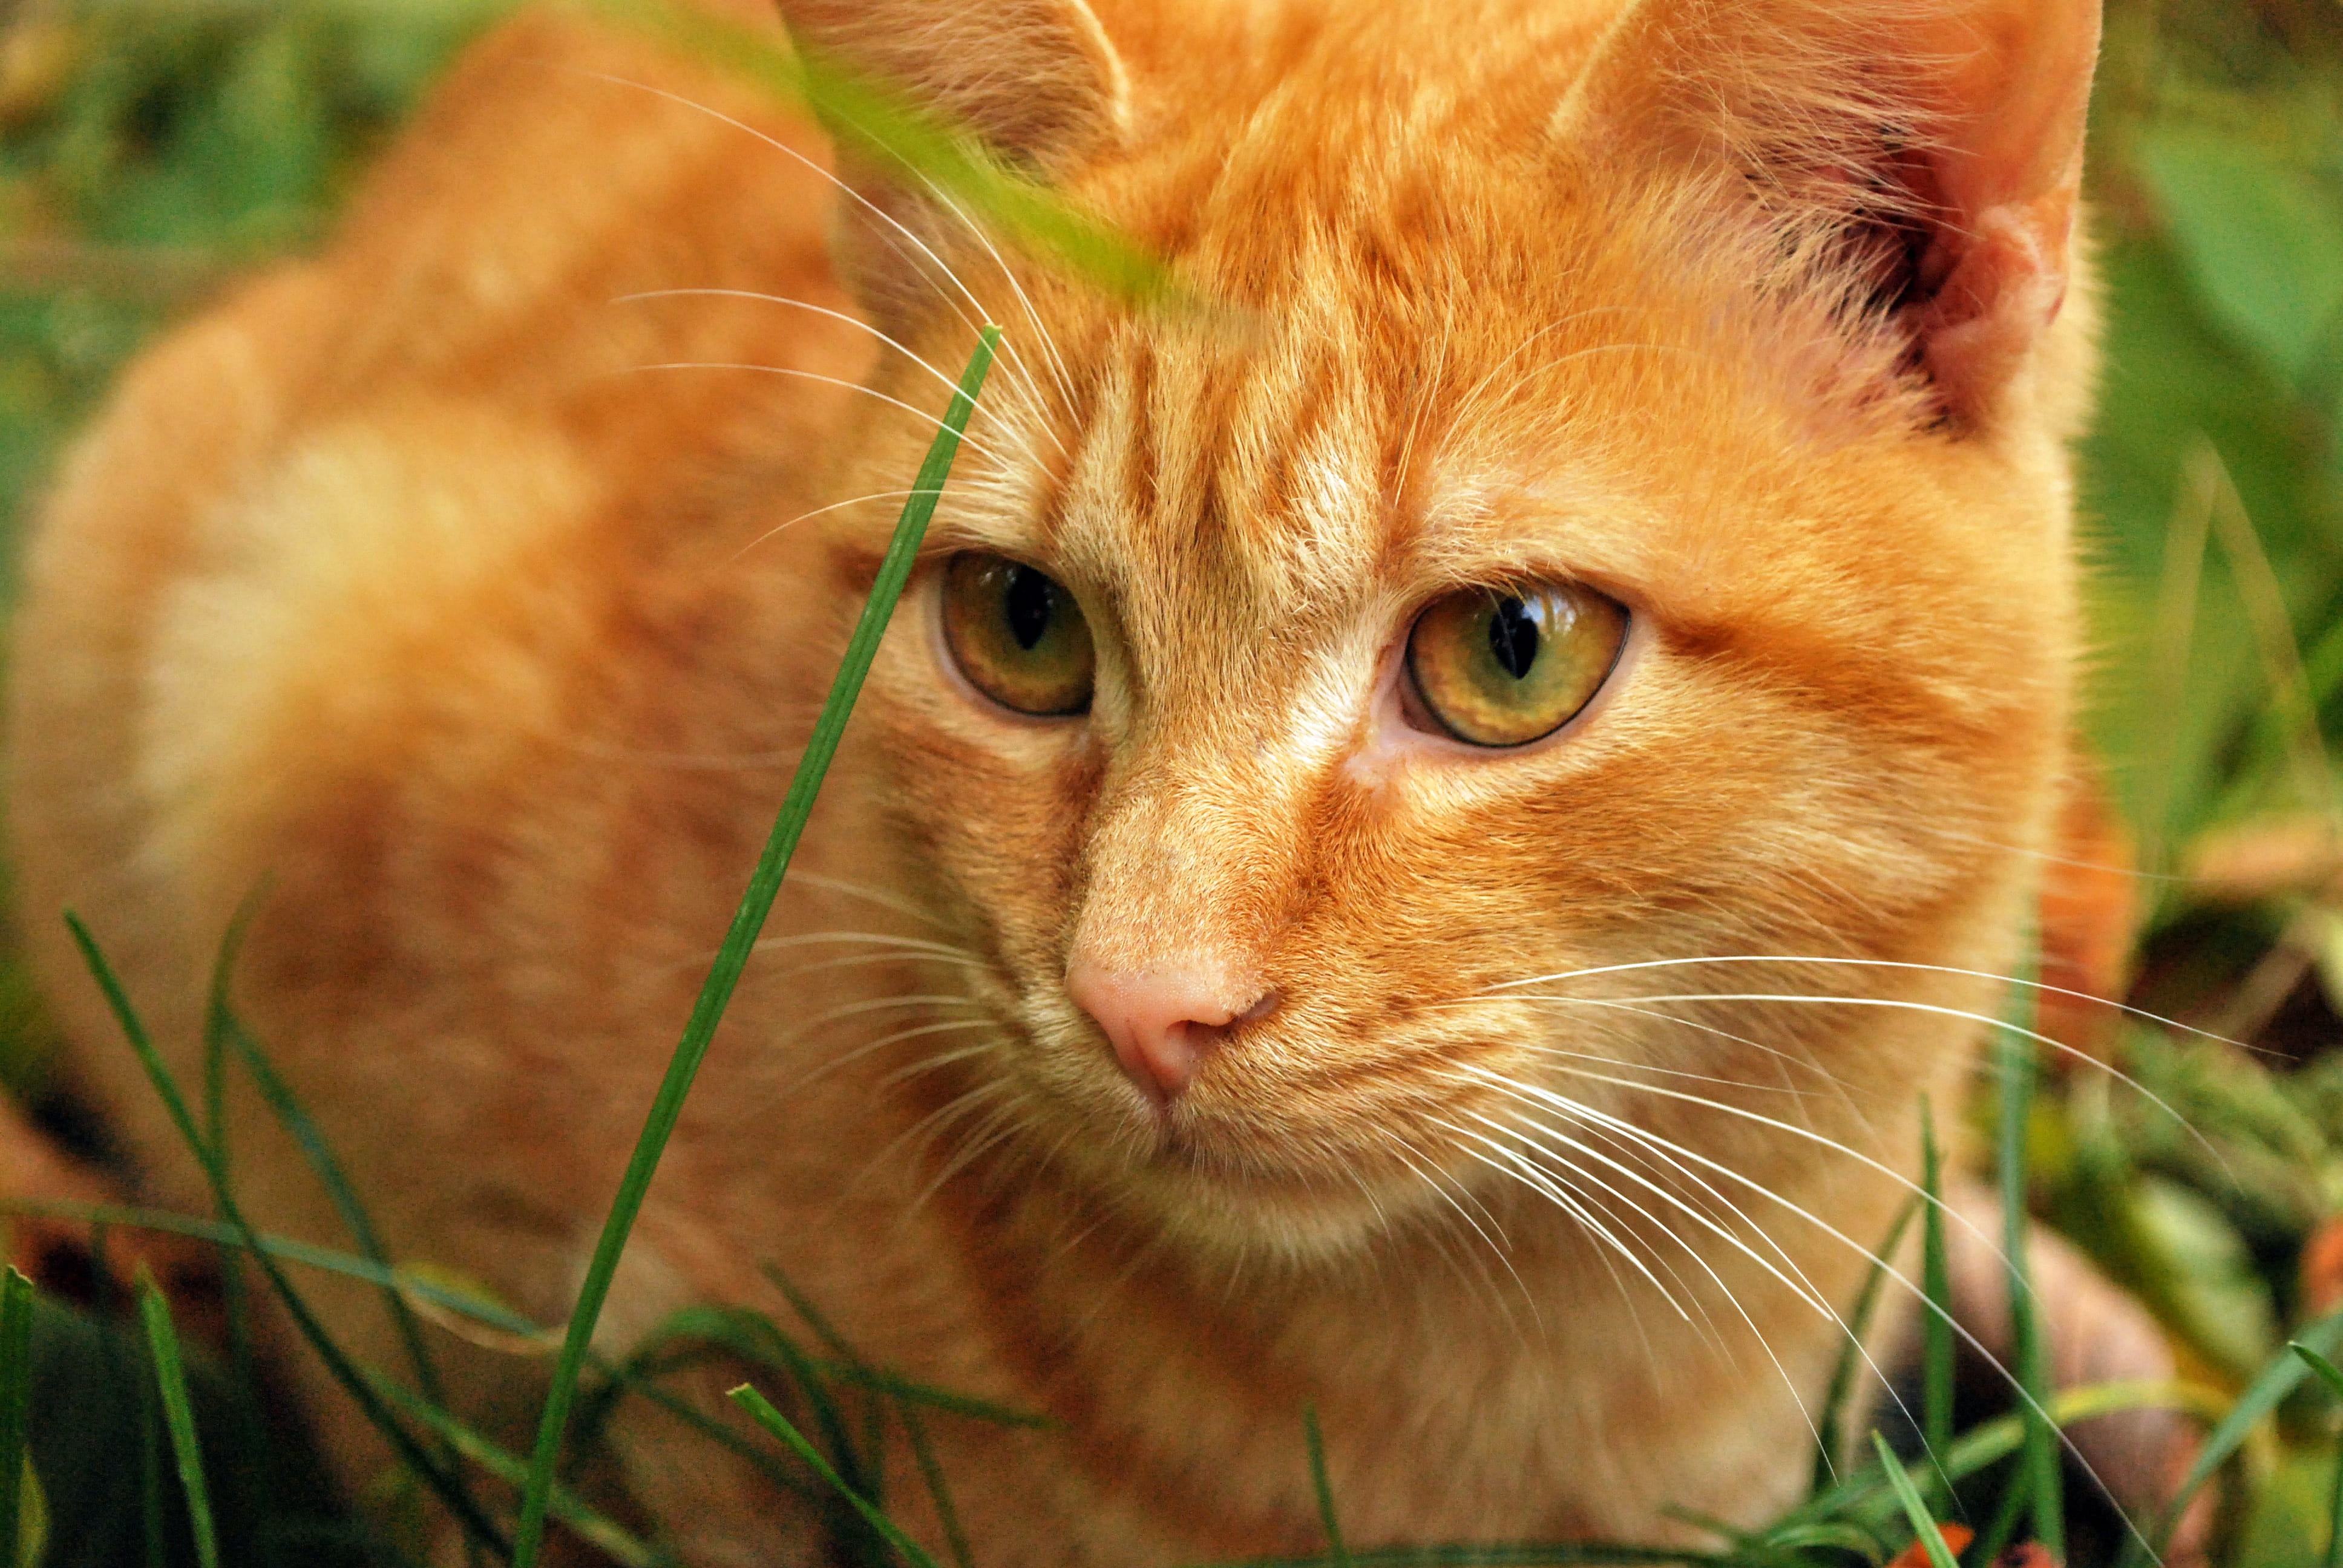 orange Tabby cat on grass field during daytime, cats, animals